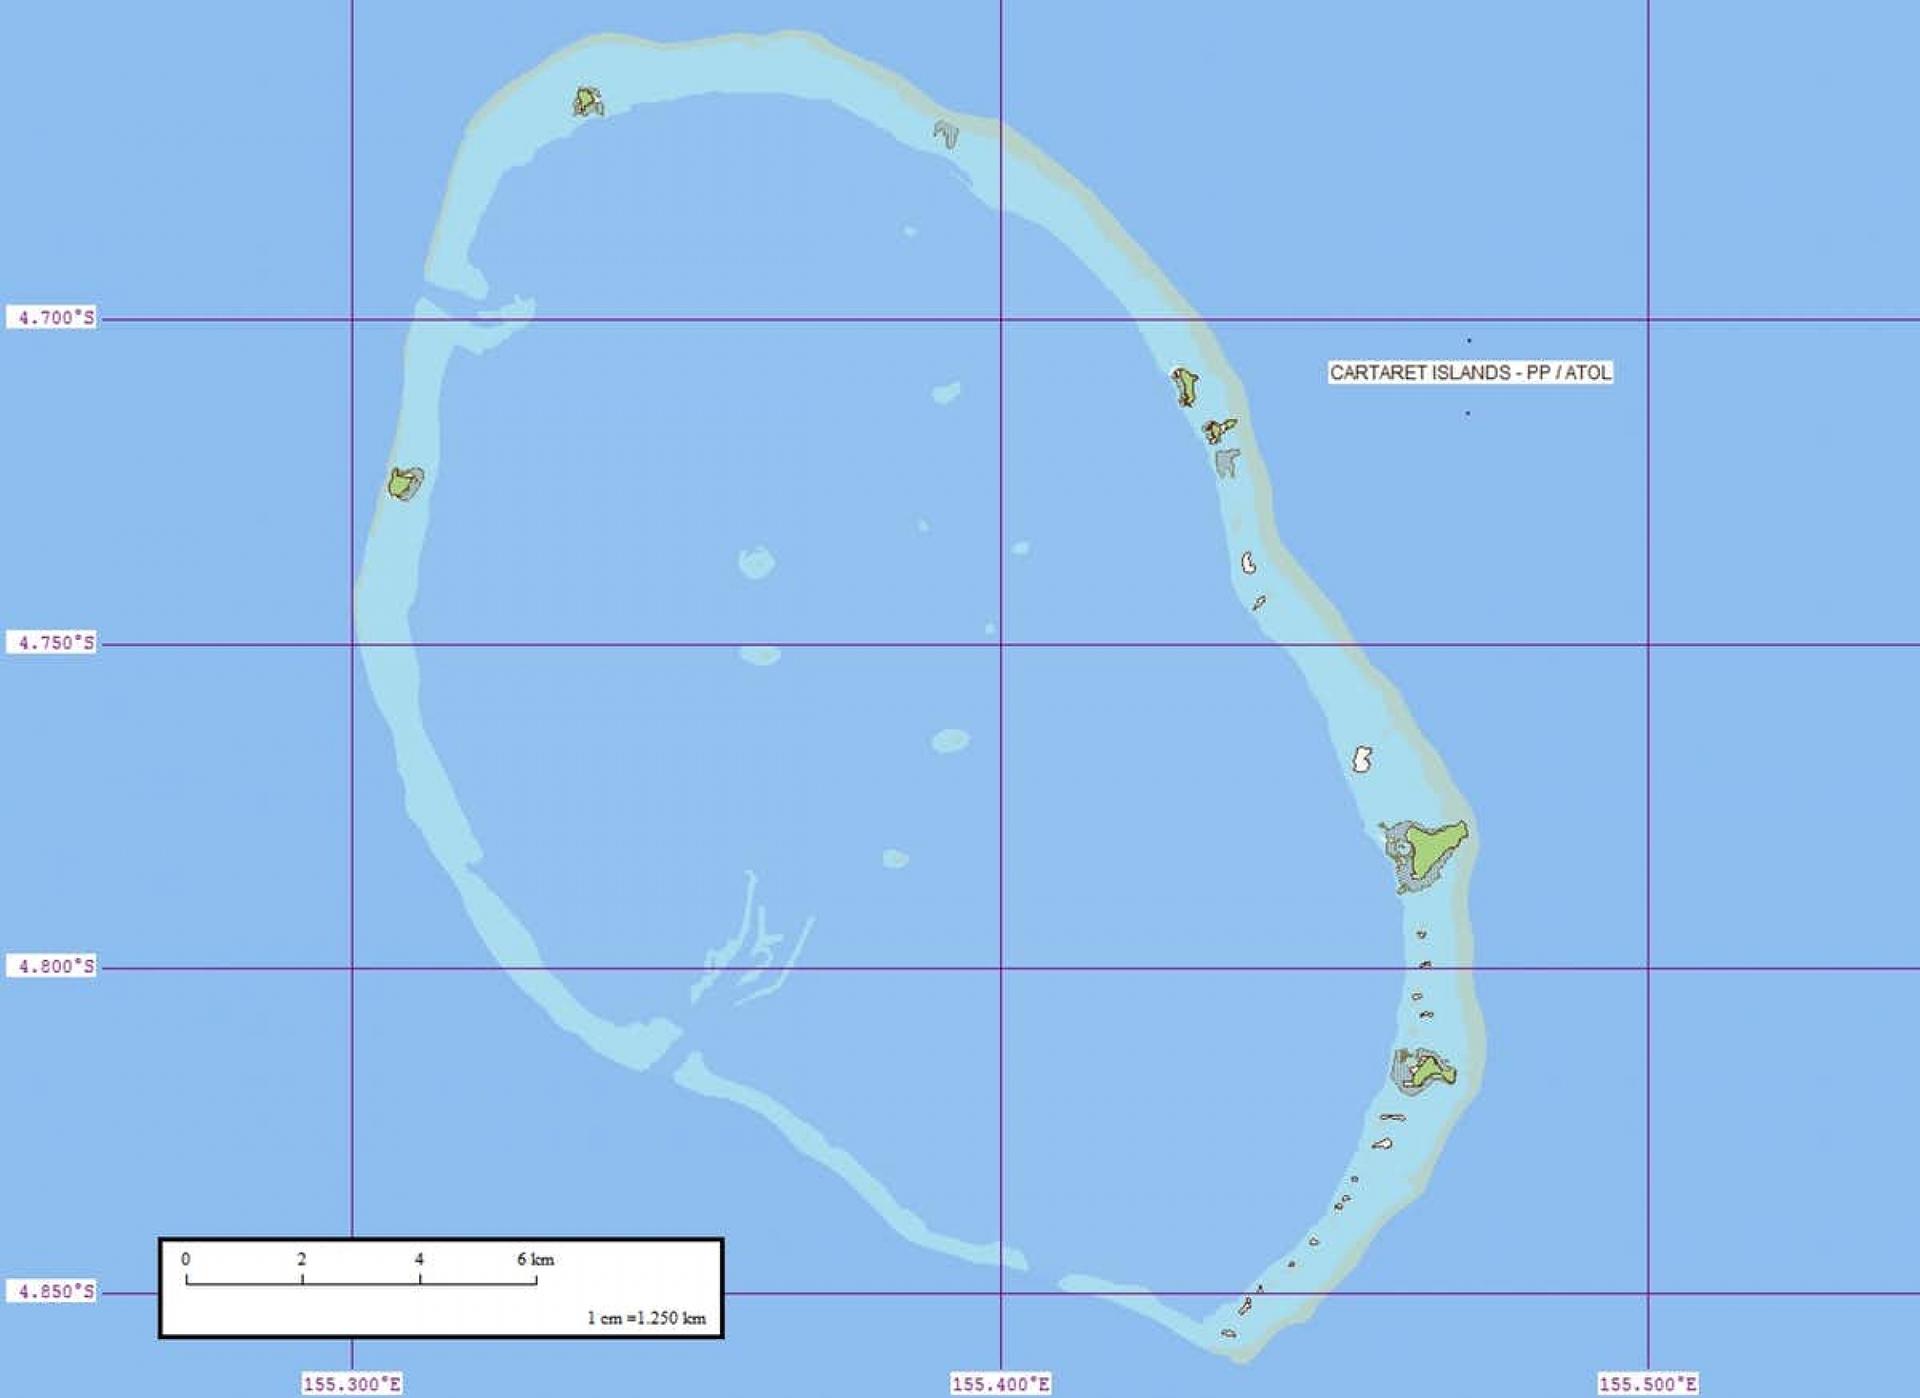 The Carteret Islands make up a low-lying atoll in the South Pacific Ocean. 